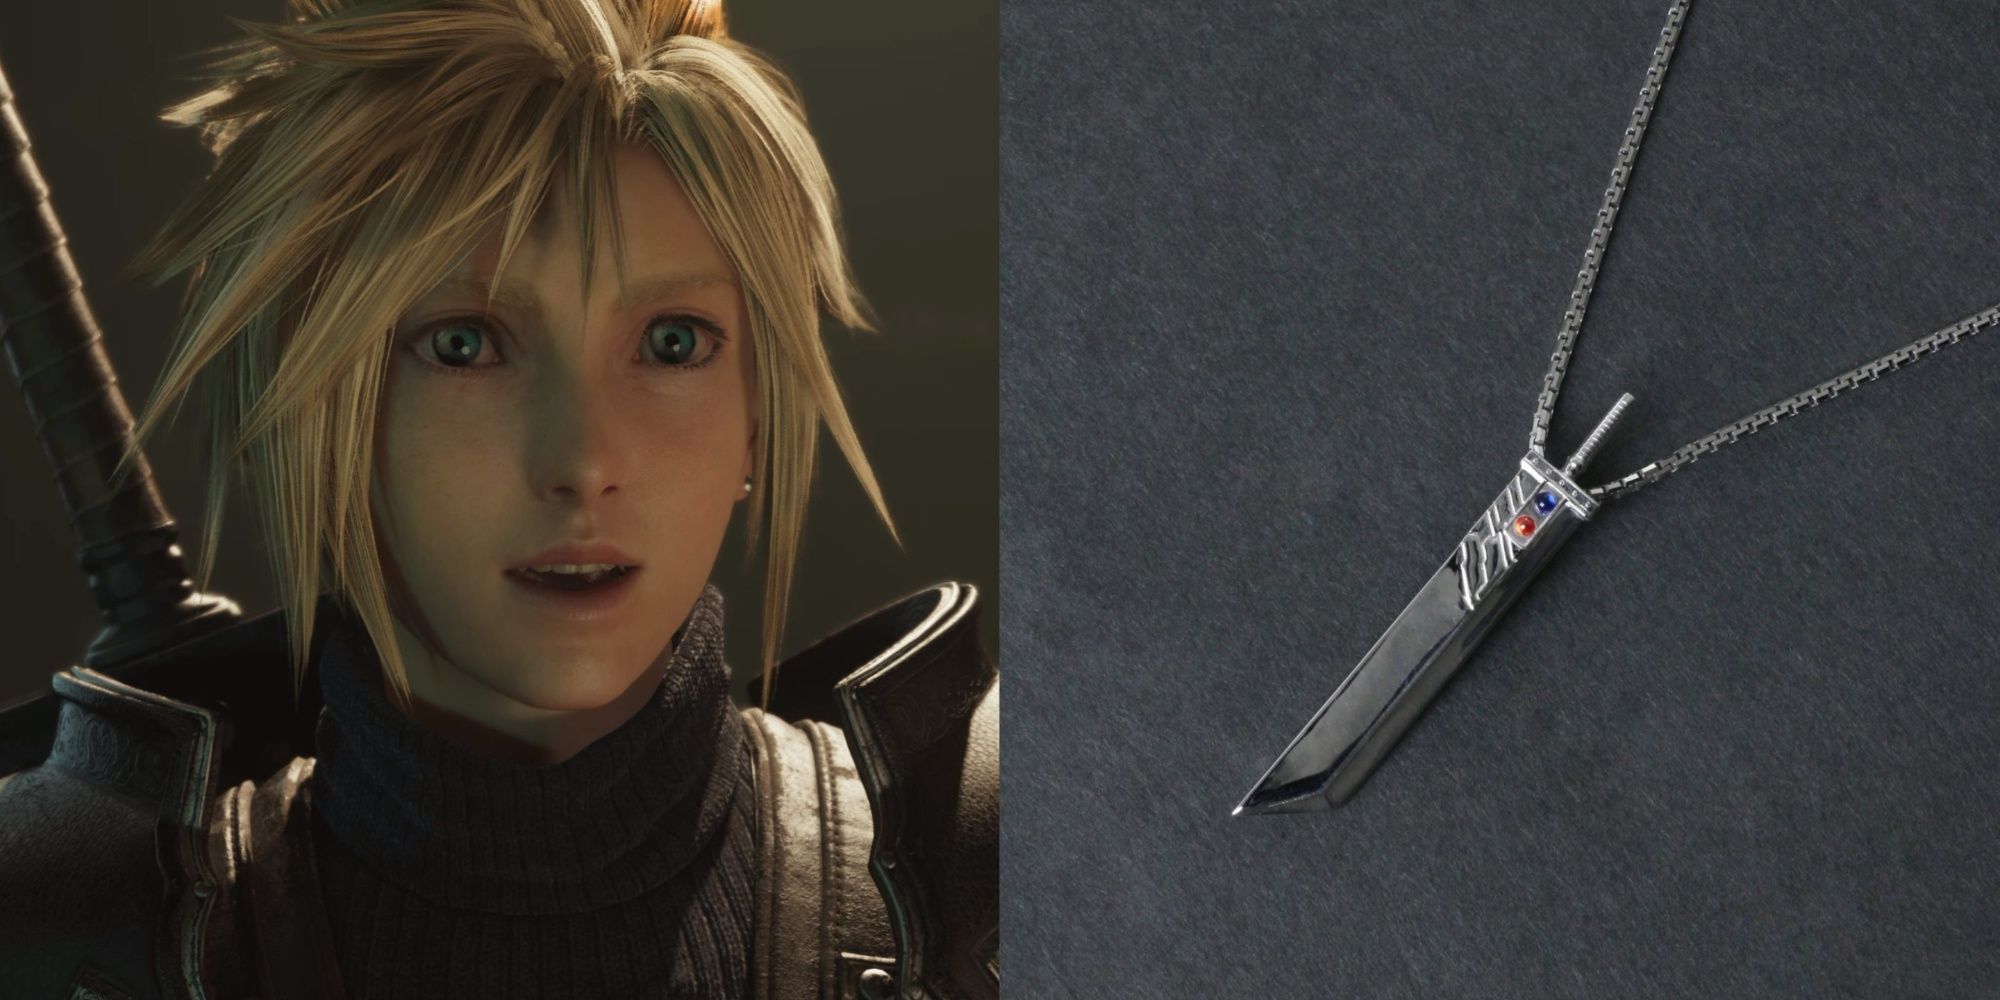 cloud in final fantasy 7 rebirth, and a buster sword necklace with red and blue materia